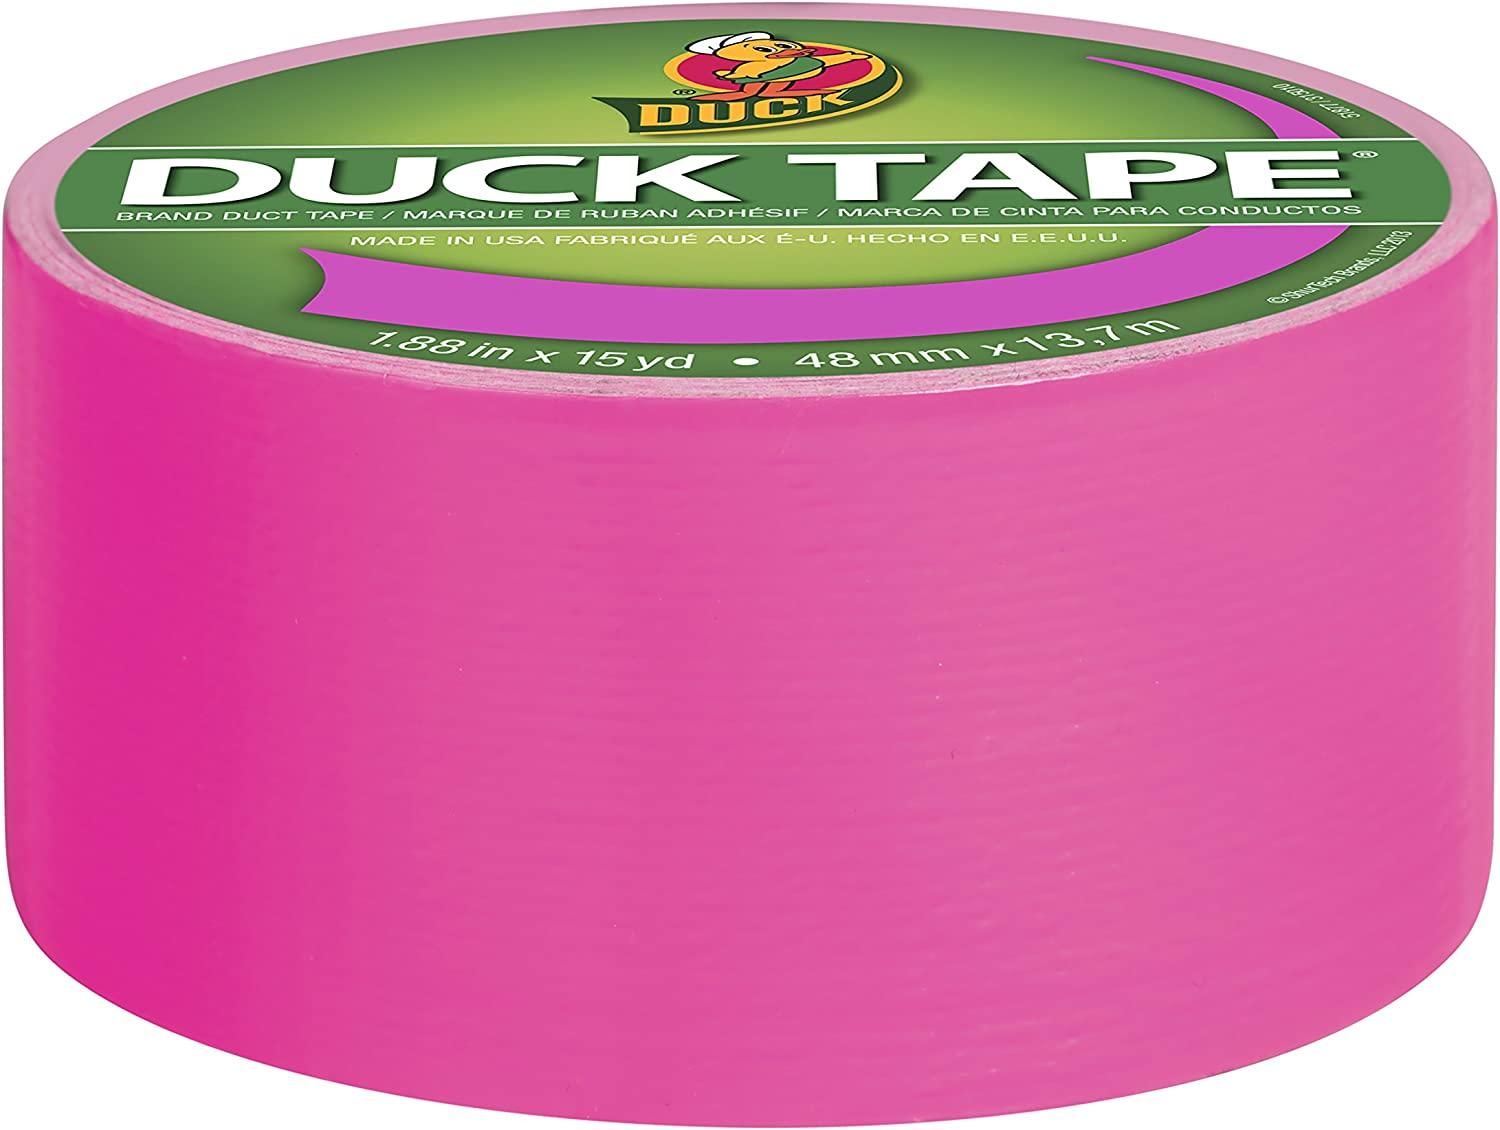 Duck Brand Color Duct Tape, White, 1.88 Inches x 20 Yards, Single Roll